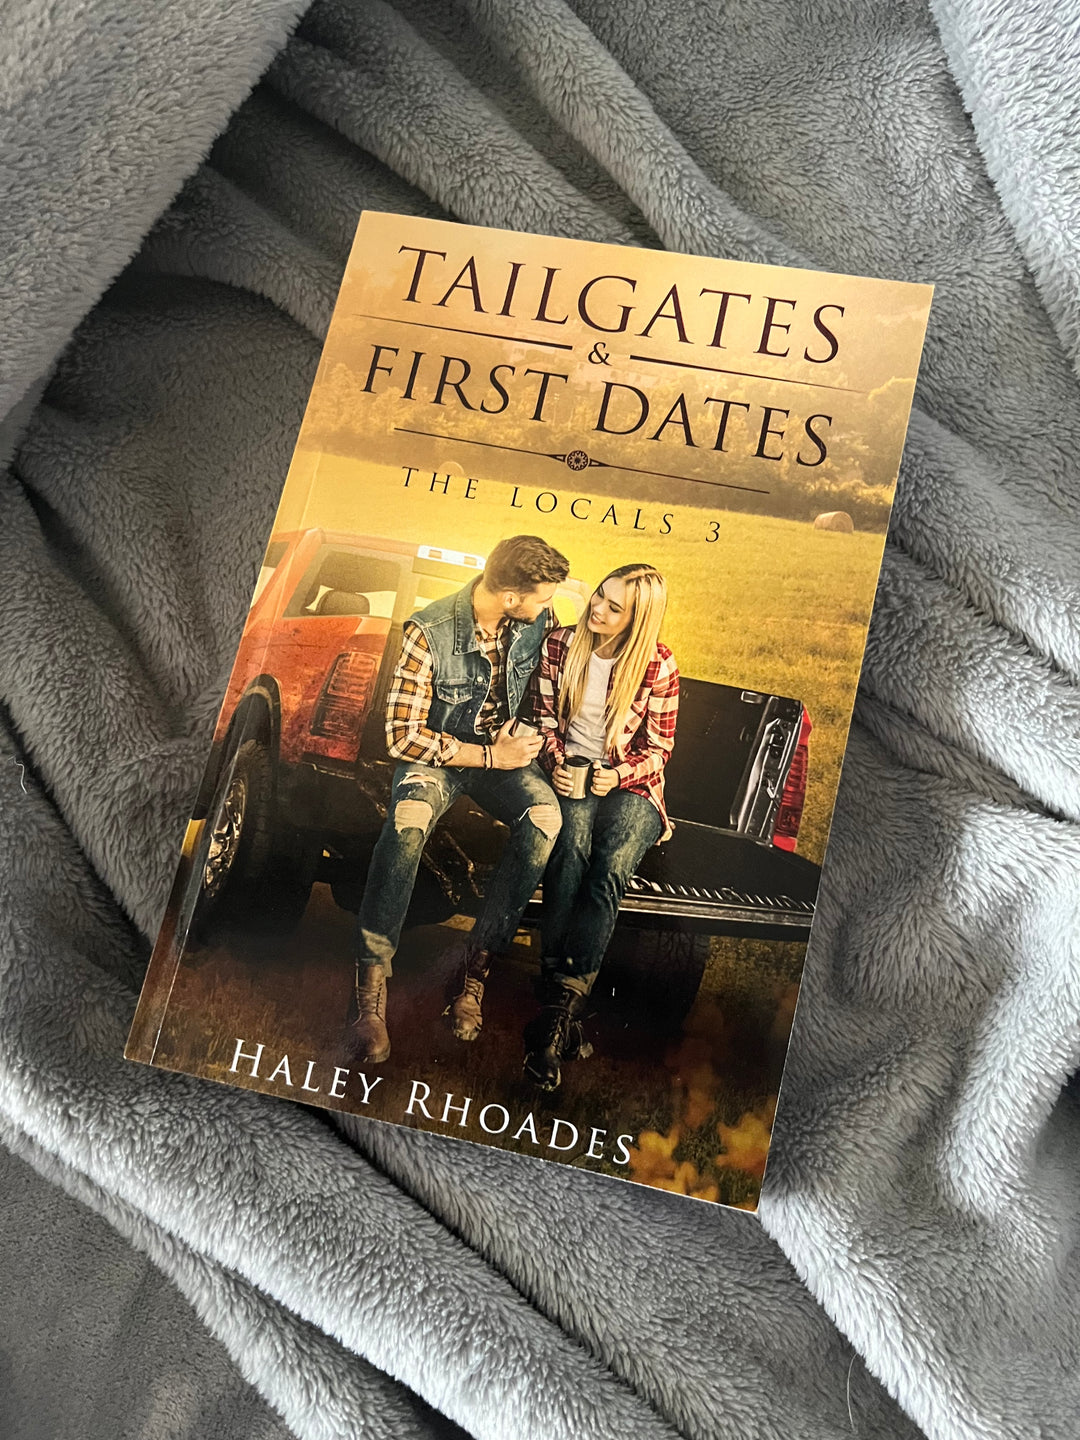 Tailgates & First Dates